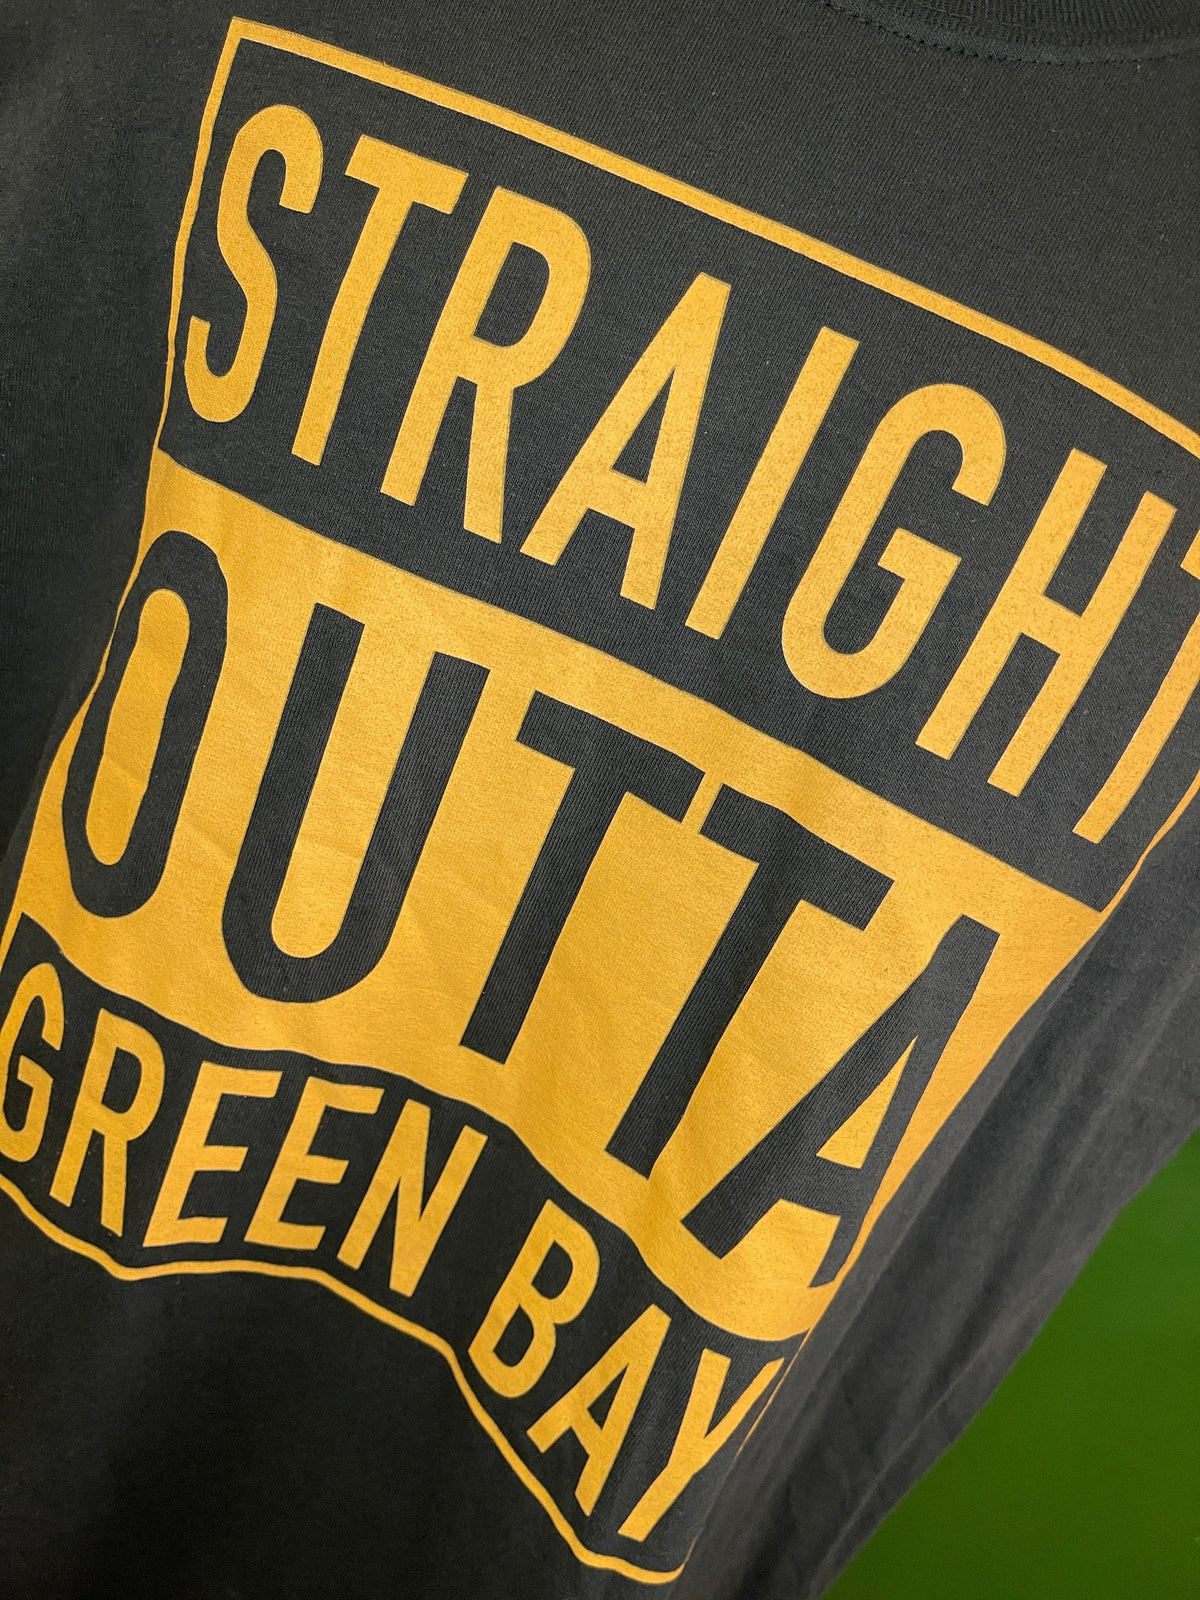 NFL Green Bay Packers "Straight Outta Green Bay" T-Shirt Men's Large